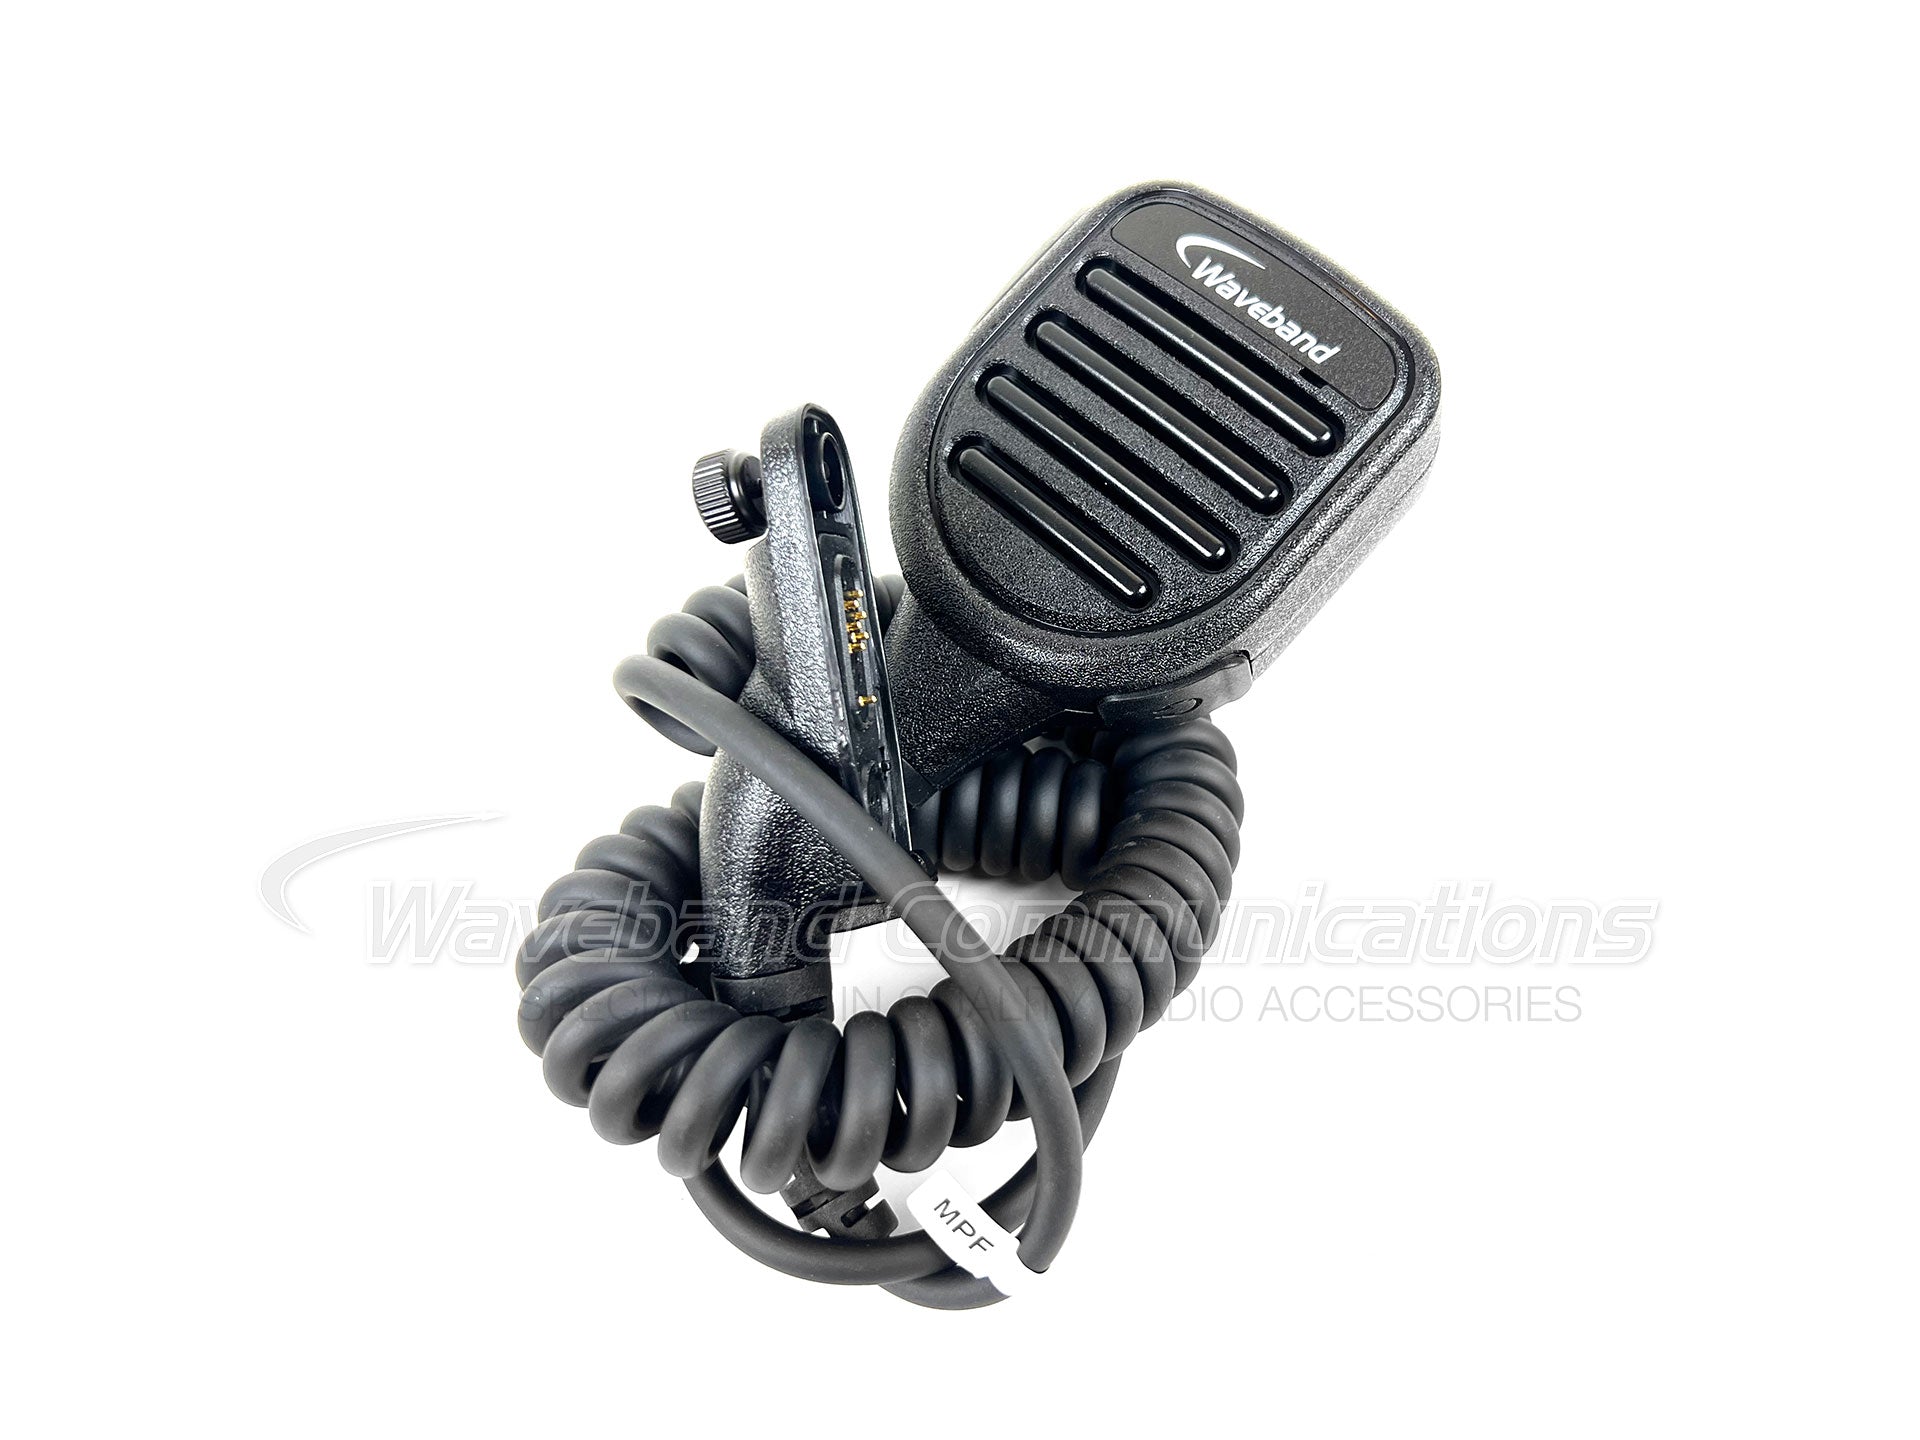 PMMN4069 Comparable Remote Speaker Microphone for Motorola APX